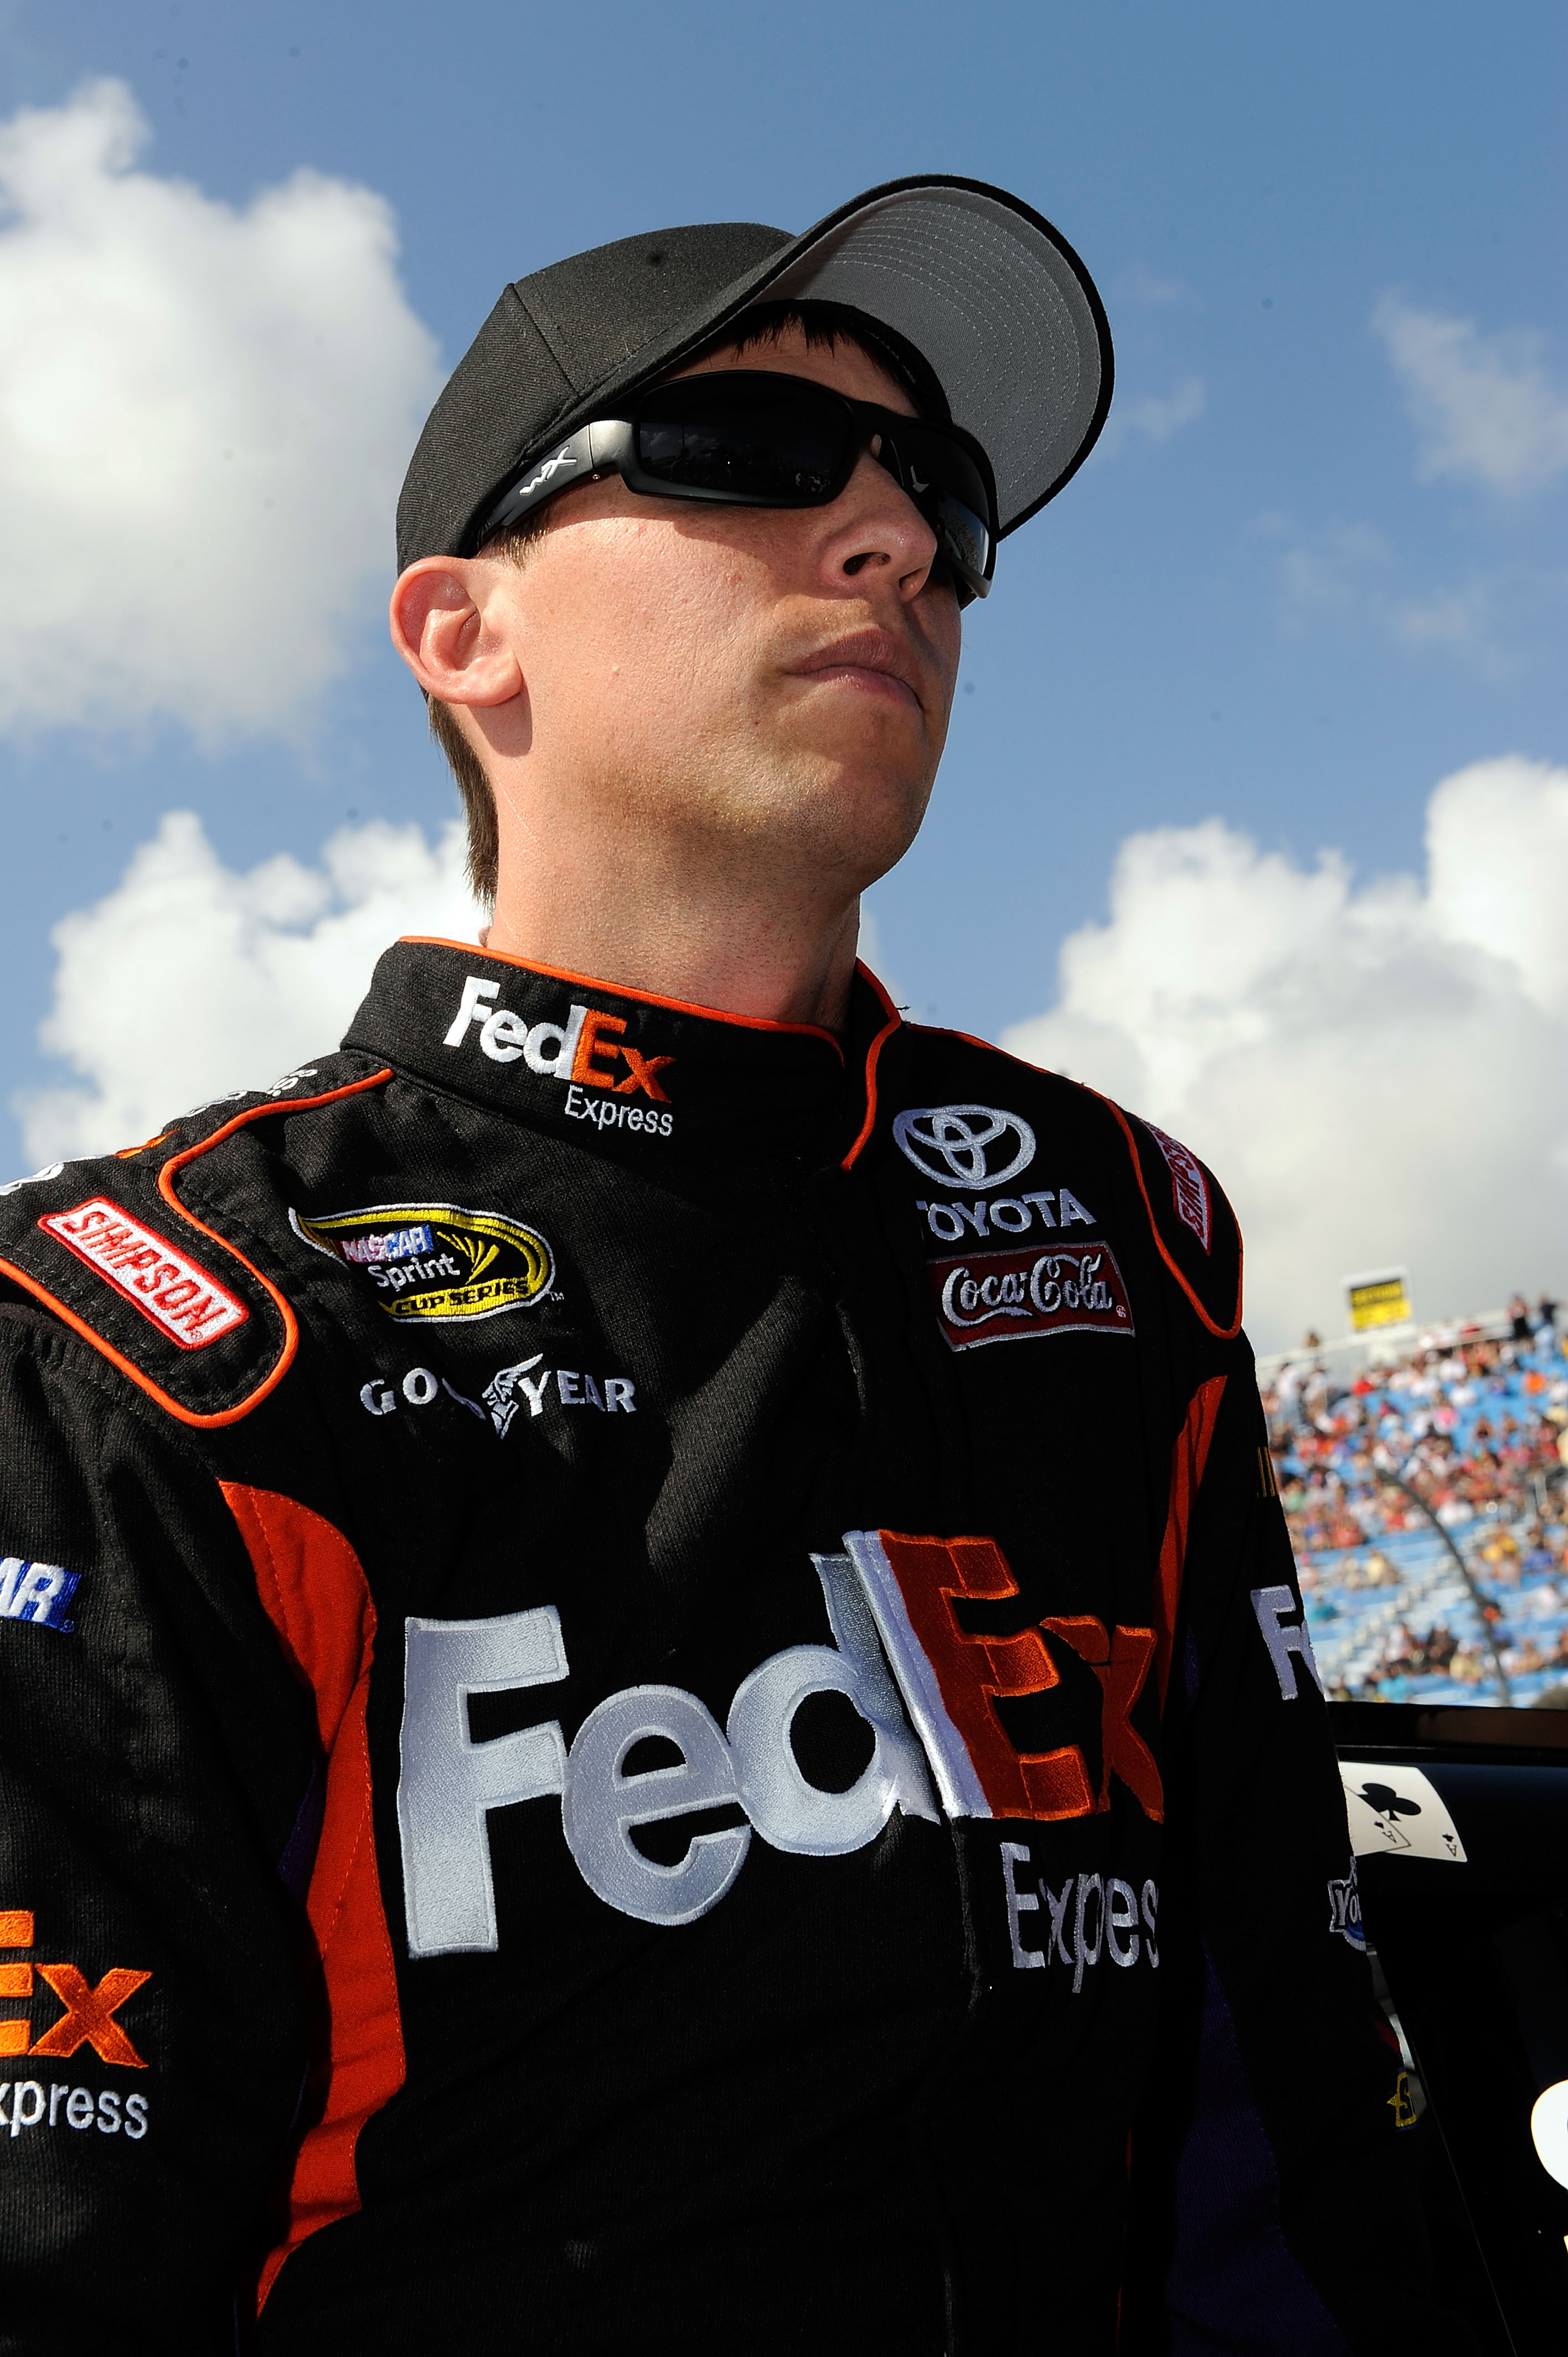 Denny Hamlin led the Sprint Cup series in wins in 2010